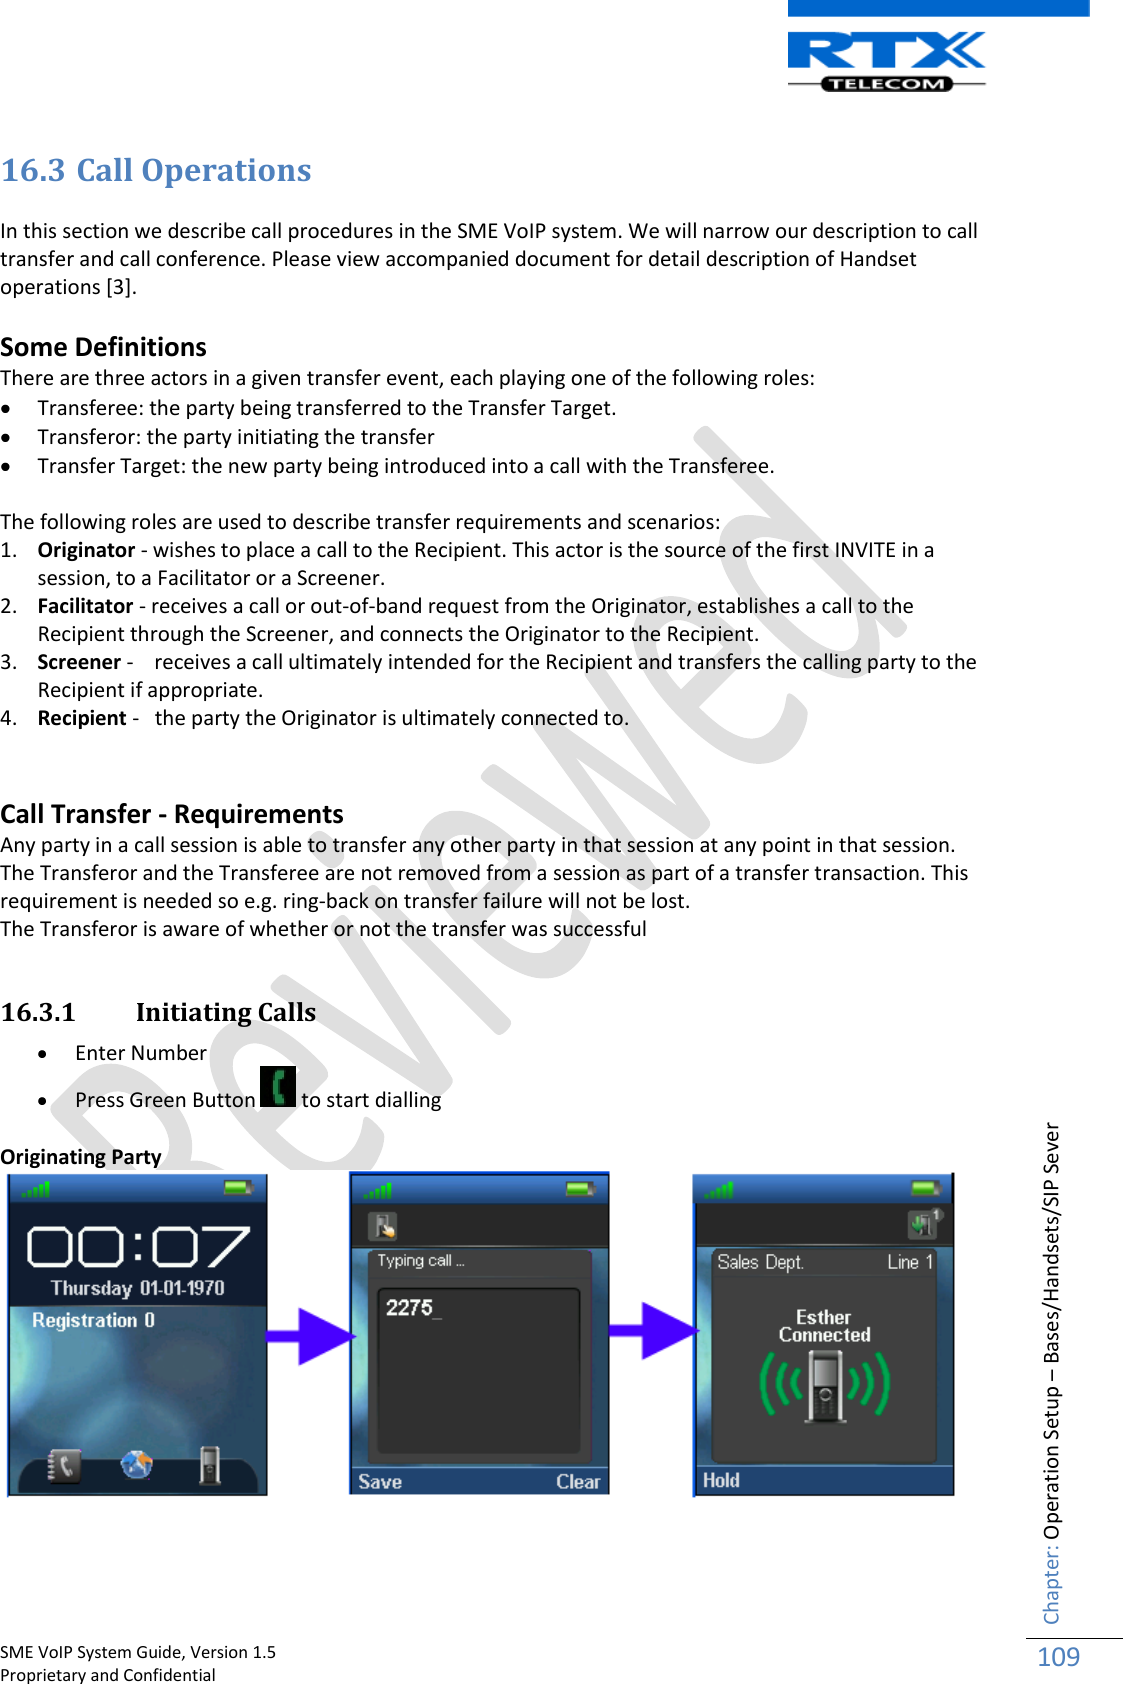    SME VoIP System Guide, Version 1.5                                                                                                                                                          Proprietary and Confidential    Chapter: Operation Setup – Bases/Handsets/SIP Sever 109  16.3 Call Operations   In this section we describe call procedures in the SME VoIP system. We will narrow our description to call transfer and call conference. Please view accompanied document for detail description of Handset operations [3].  Some Definitions There are three actors in a given transfer event, each playing one of the following roles:  Transferee: the party being transferred to the Transfer Target.  Transferor: the party initiating the transfer  Transfer Target: the new party being introduced into a call with the Transferee.  The following roles are used to describe transfer requirements and scenarios: 1. Originator - wishes to place a call to the Recipient. This actor is the source of the first INVITE in a session, to a Facilitator or a Screener. 2. Facilitator - receives a call or out-of-band request from the Originator, establishes a call to the Recipient through the Screener, and connects the Originator to the Recipient. 3. Screener -    receives a call ultimately intended for the Recipient and transfers the calling party to the Recipient if appropriate. 4. Recipient -   the party the Originator is ultimately connected to.   Call Transfer - Requirements Any party in a call session is able to transfer any other party in that session at any point in that session. The Transferor and the Transferee are not removed from a session as part of a transfer transaction. This requirement is needed so e.g. ring-back on transfer failure will not be lost. The Transferor is aware of whether or not the transfer was successful  16.3.1 Initiating Calls   Enter Number   Press Green Button   to start dialling  Originating Party   